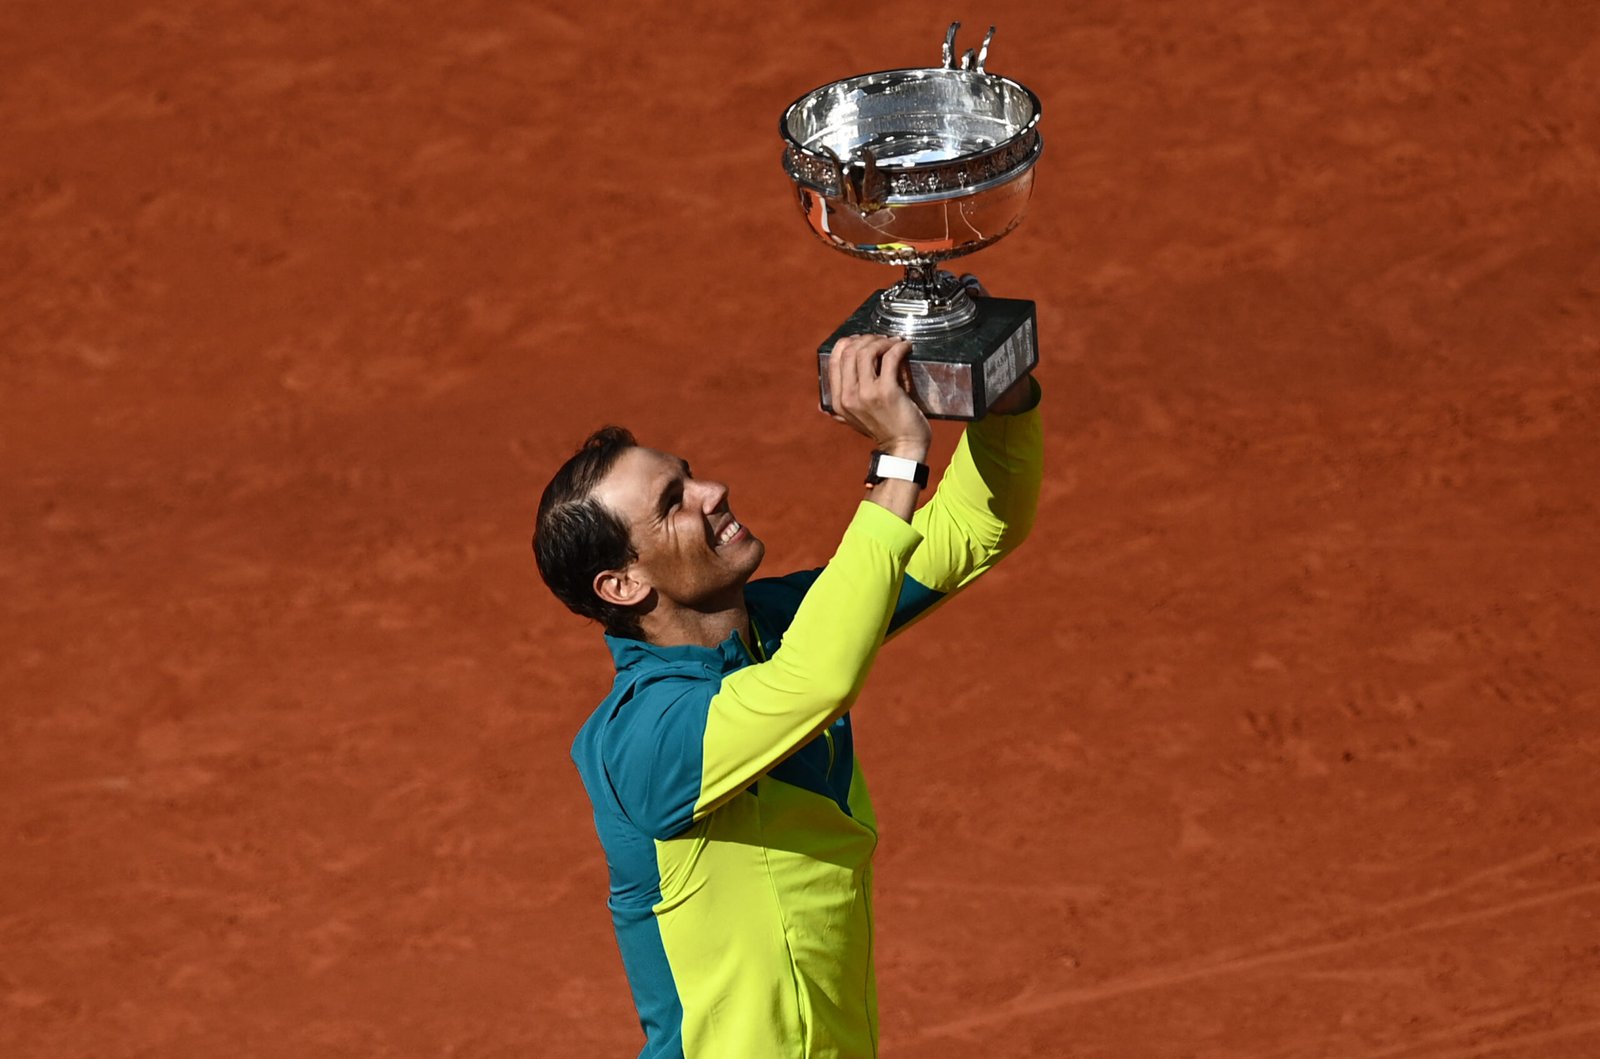 Beating Rafael Nadal at the French Open